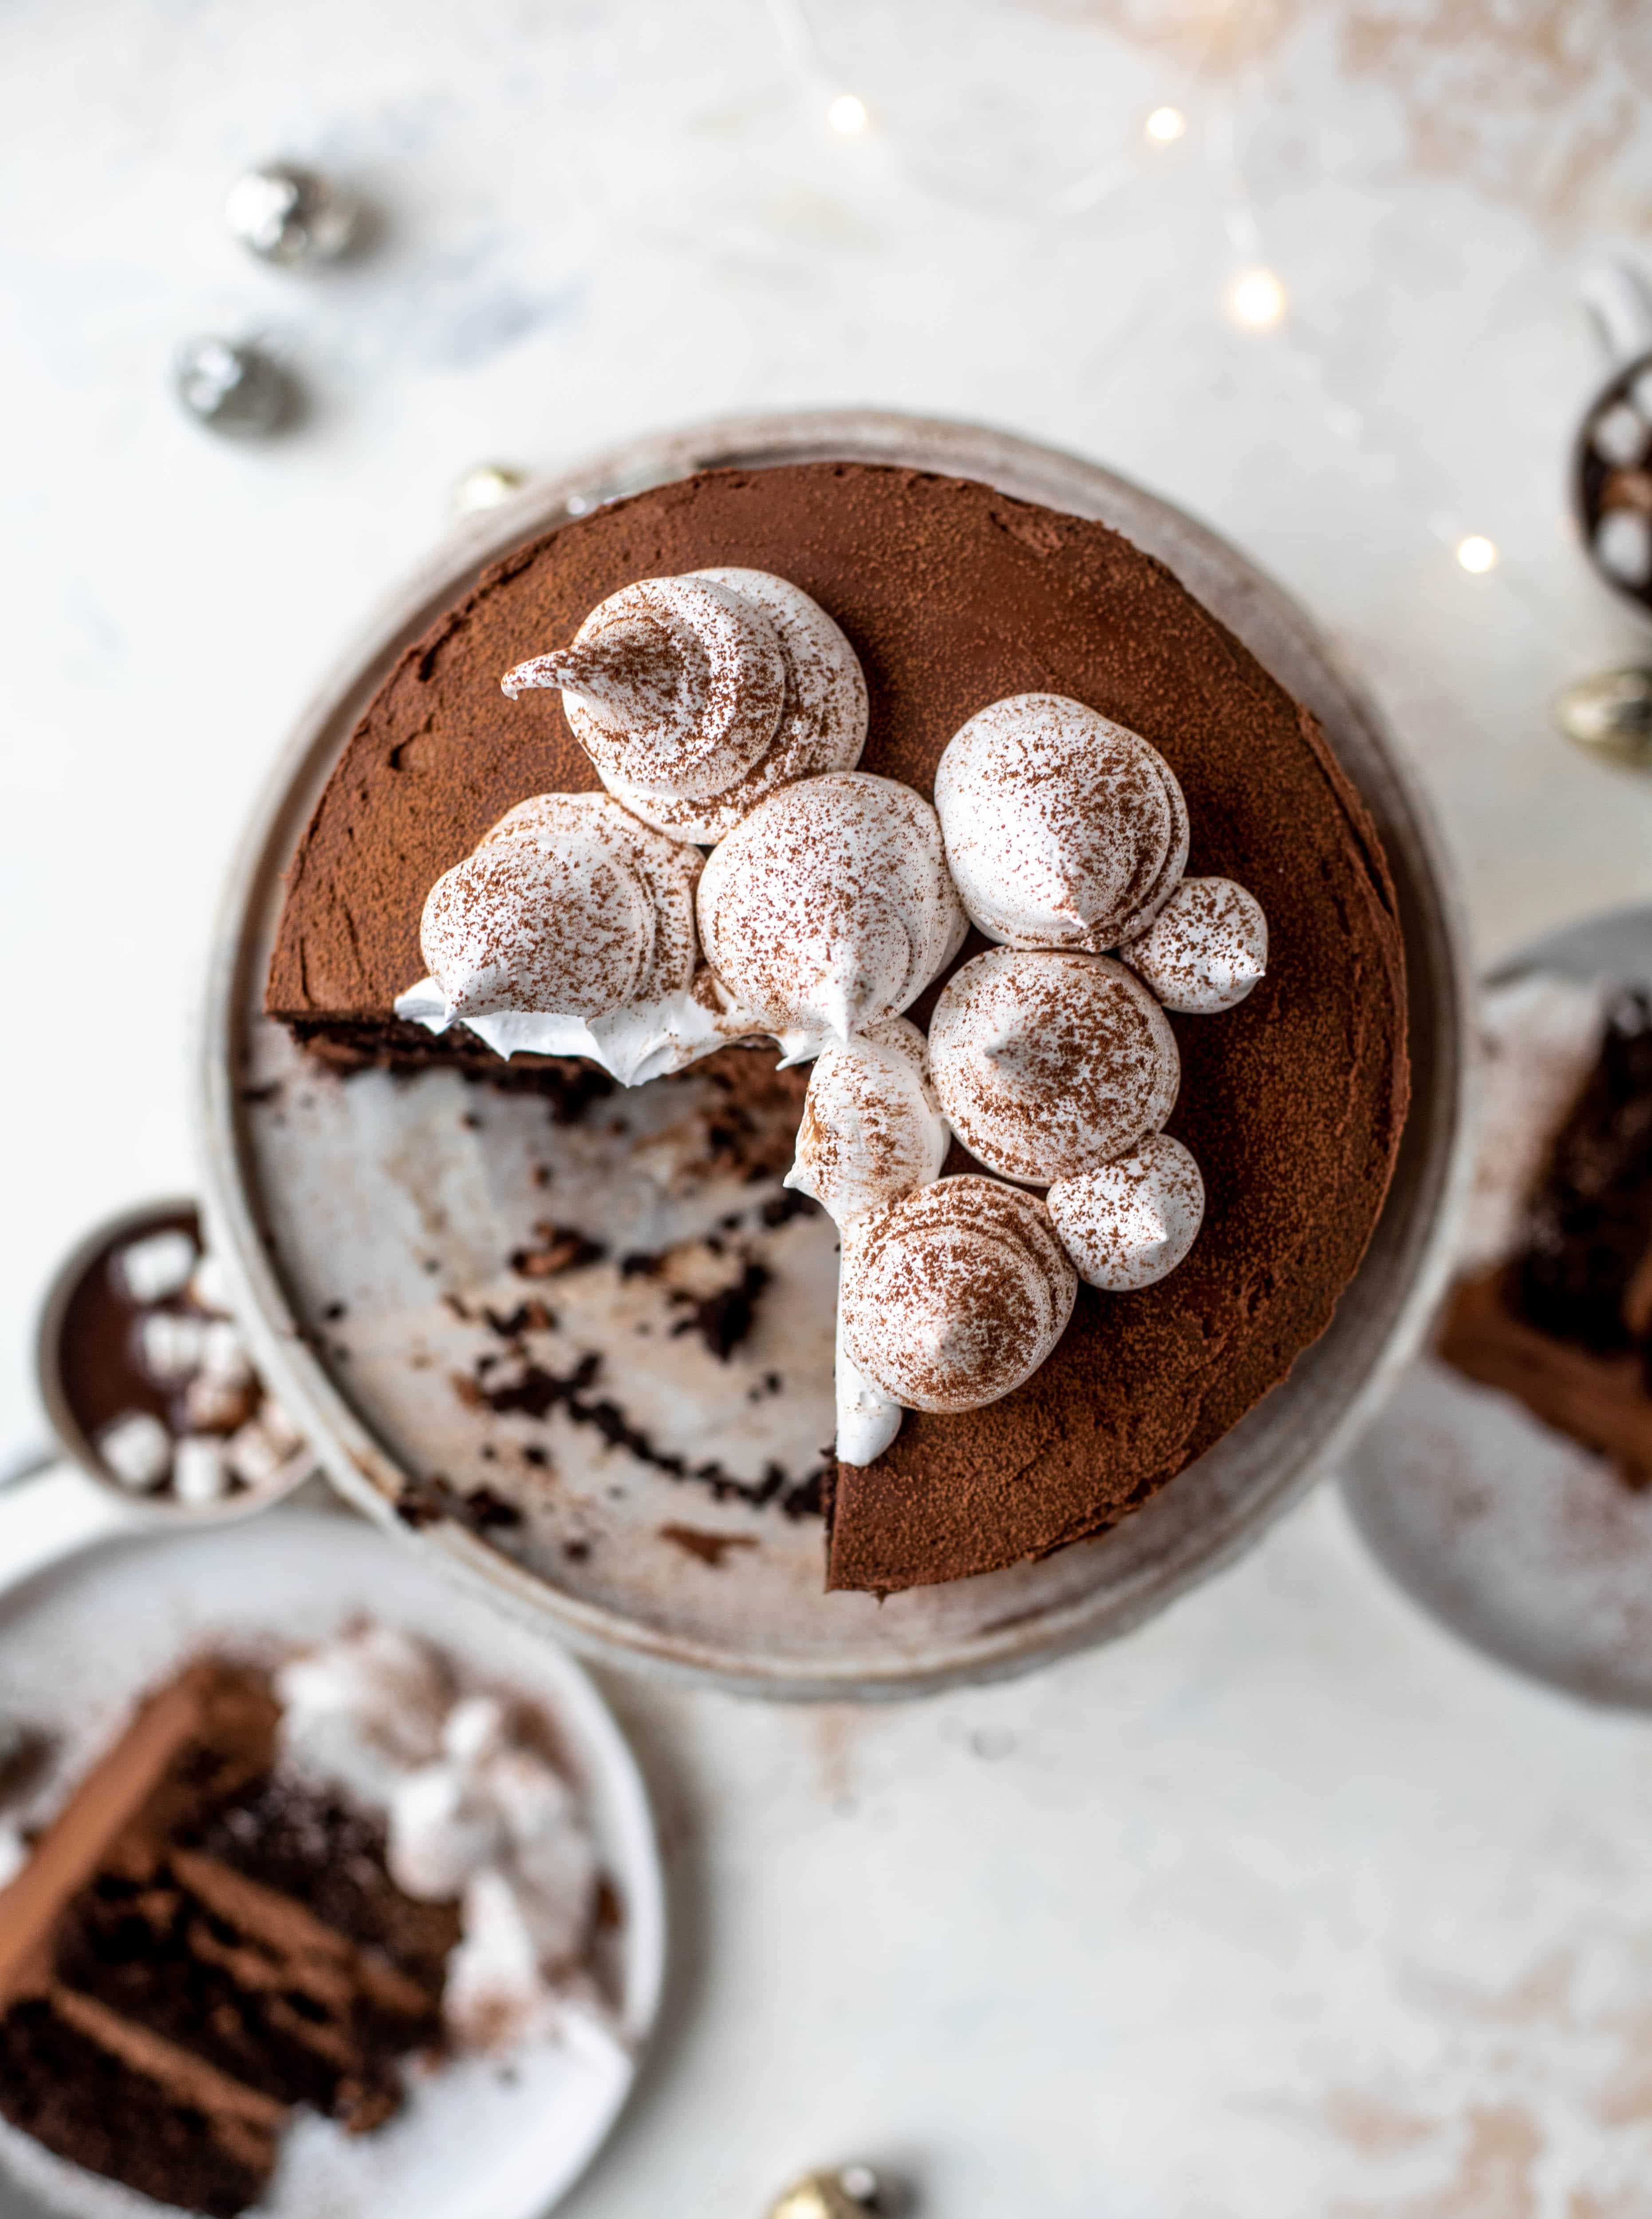 This hot cocoa cake is made with the fudgiest chocolate cake, smothered in chocolate cream cheese frosting and dolloped with whipped marshmallow!